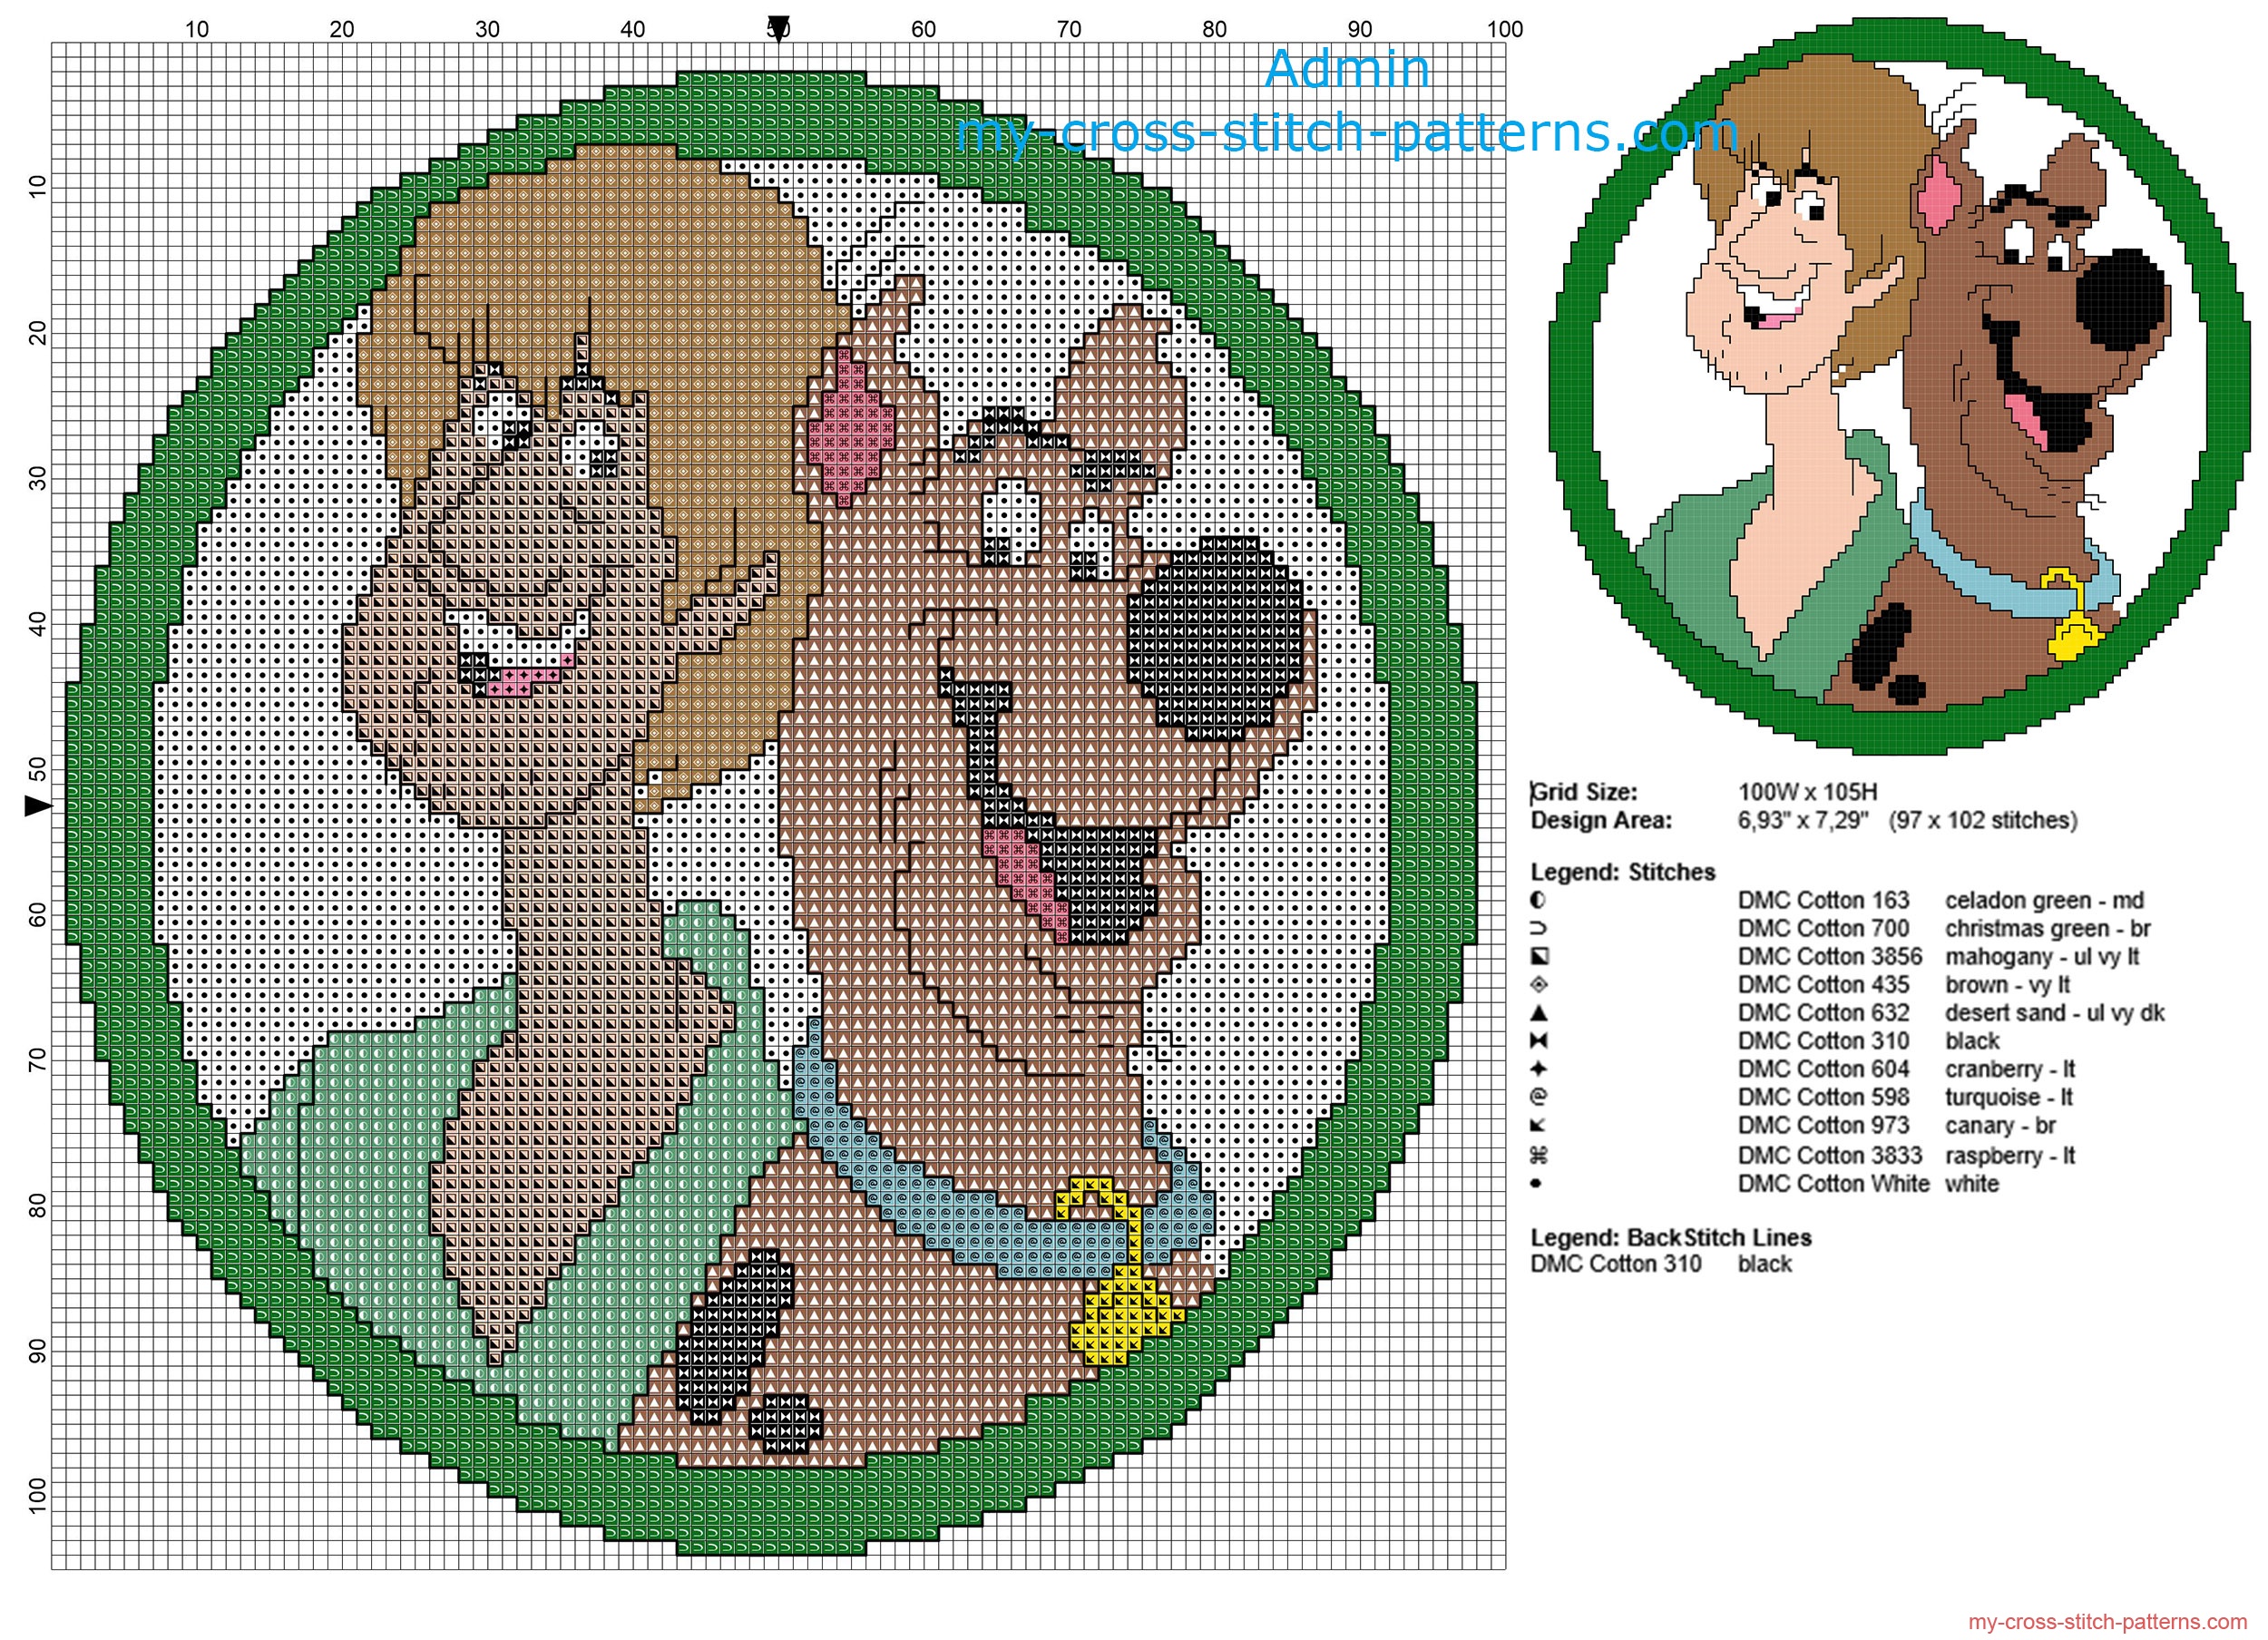 scooby_doo_and_shaggy_in_a_green_circle_frame_free_back_stitch_cross_stitch_pattern